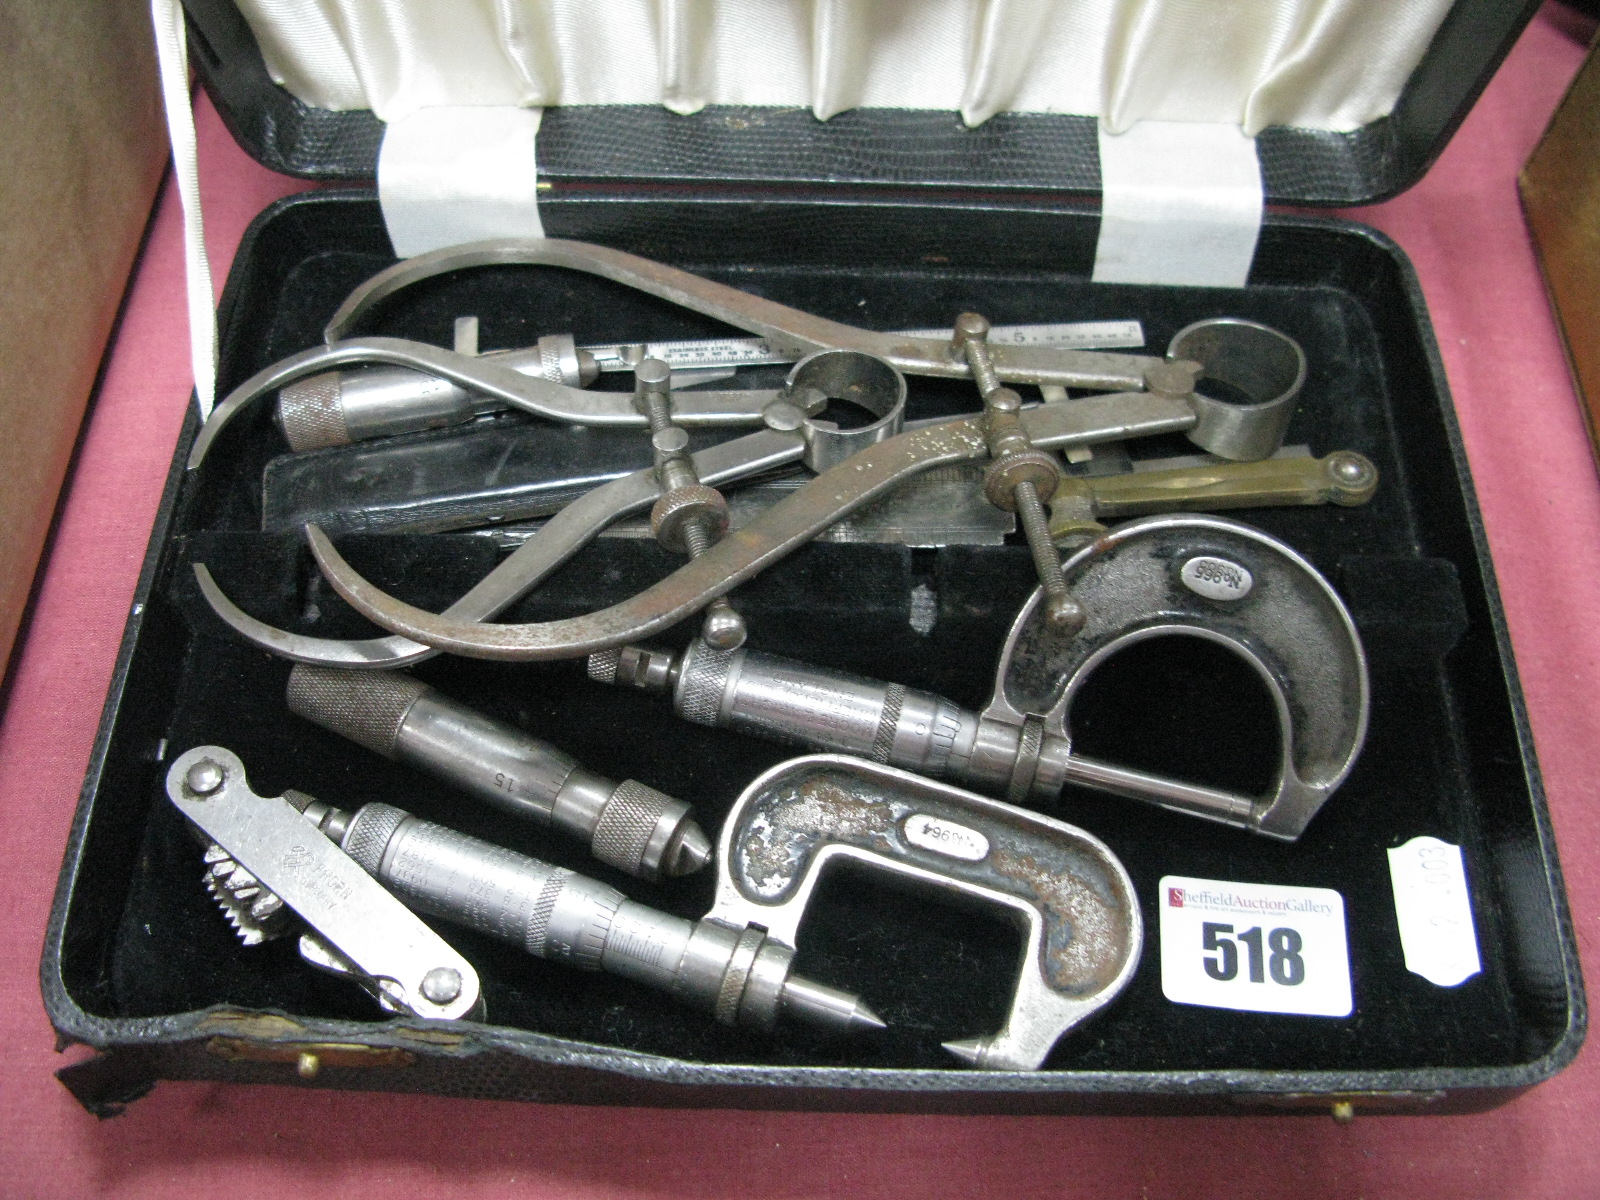 Moore & Wright Micrometers, Marples calipers, Rabone and Chesterman rules, Frohn and other